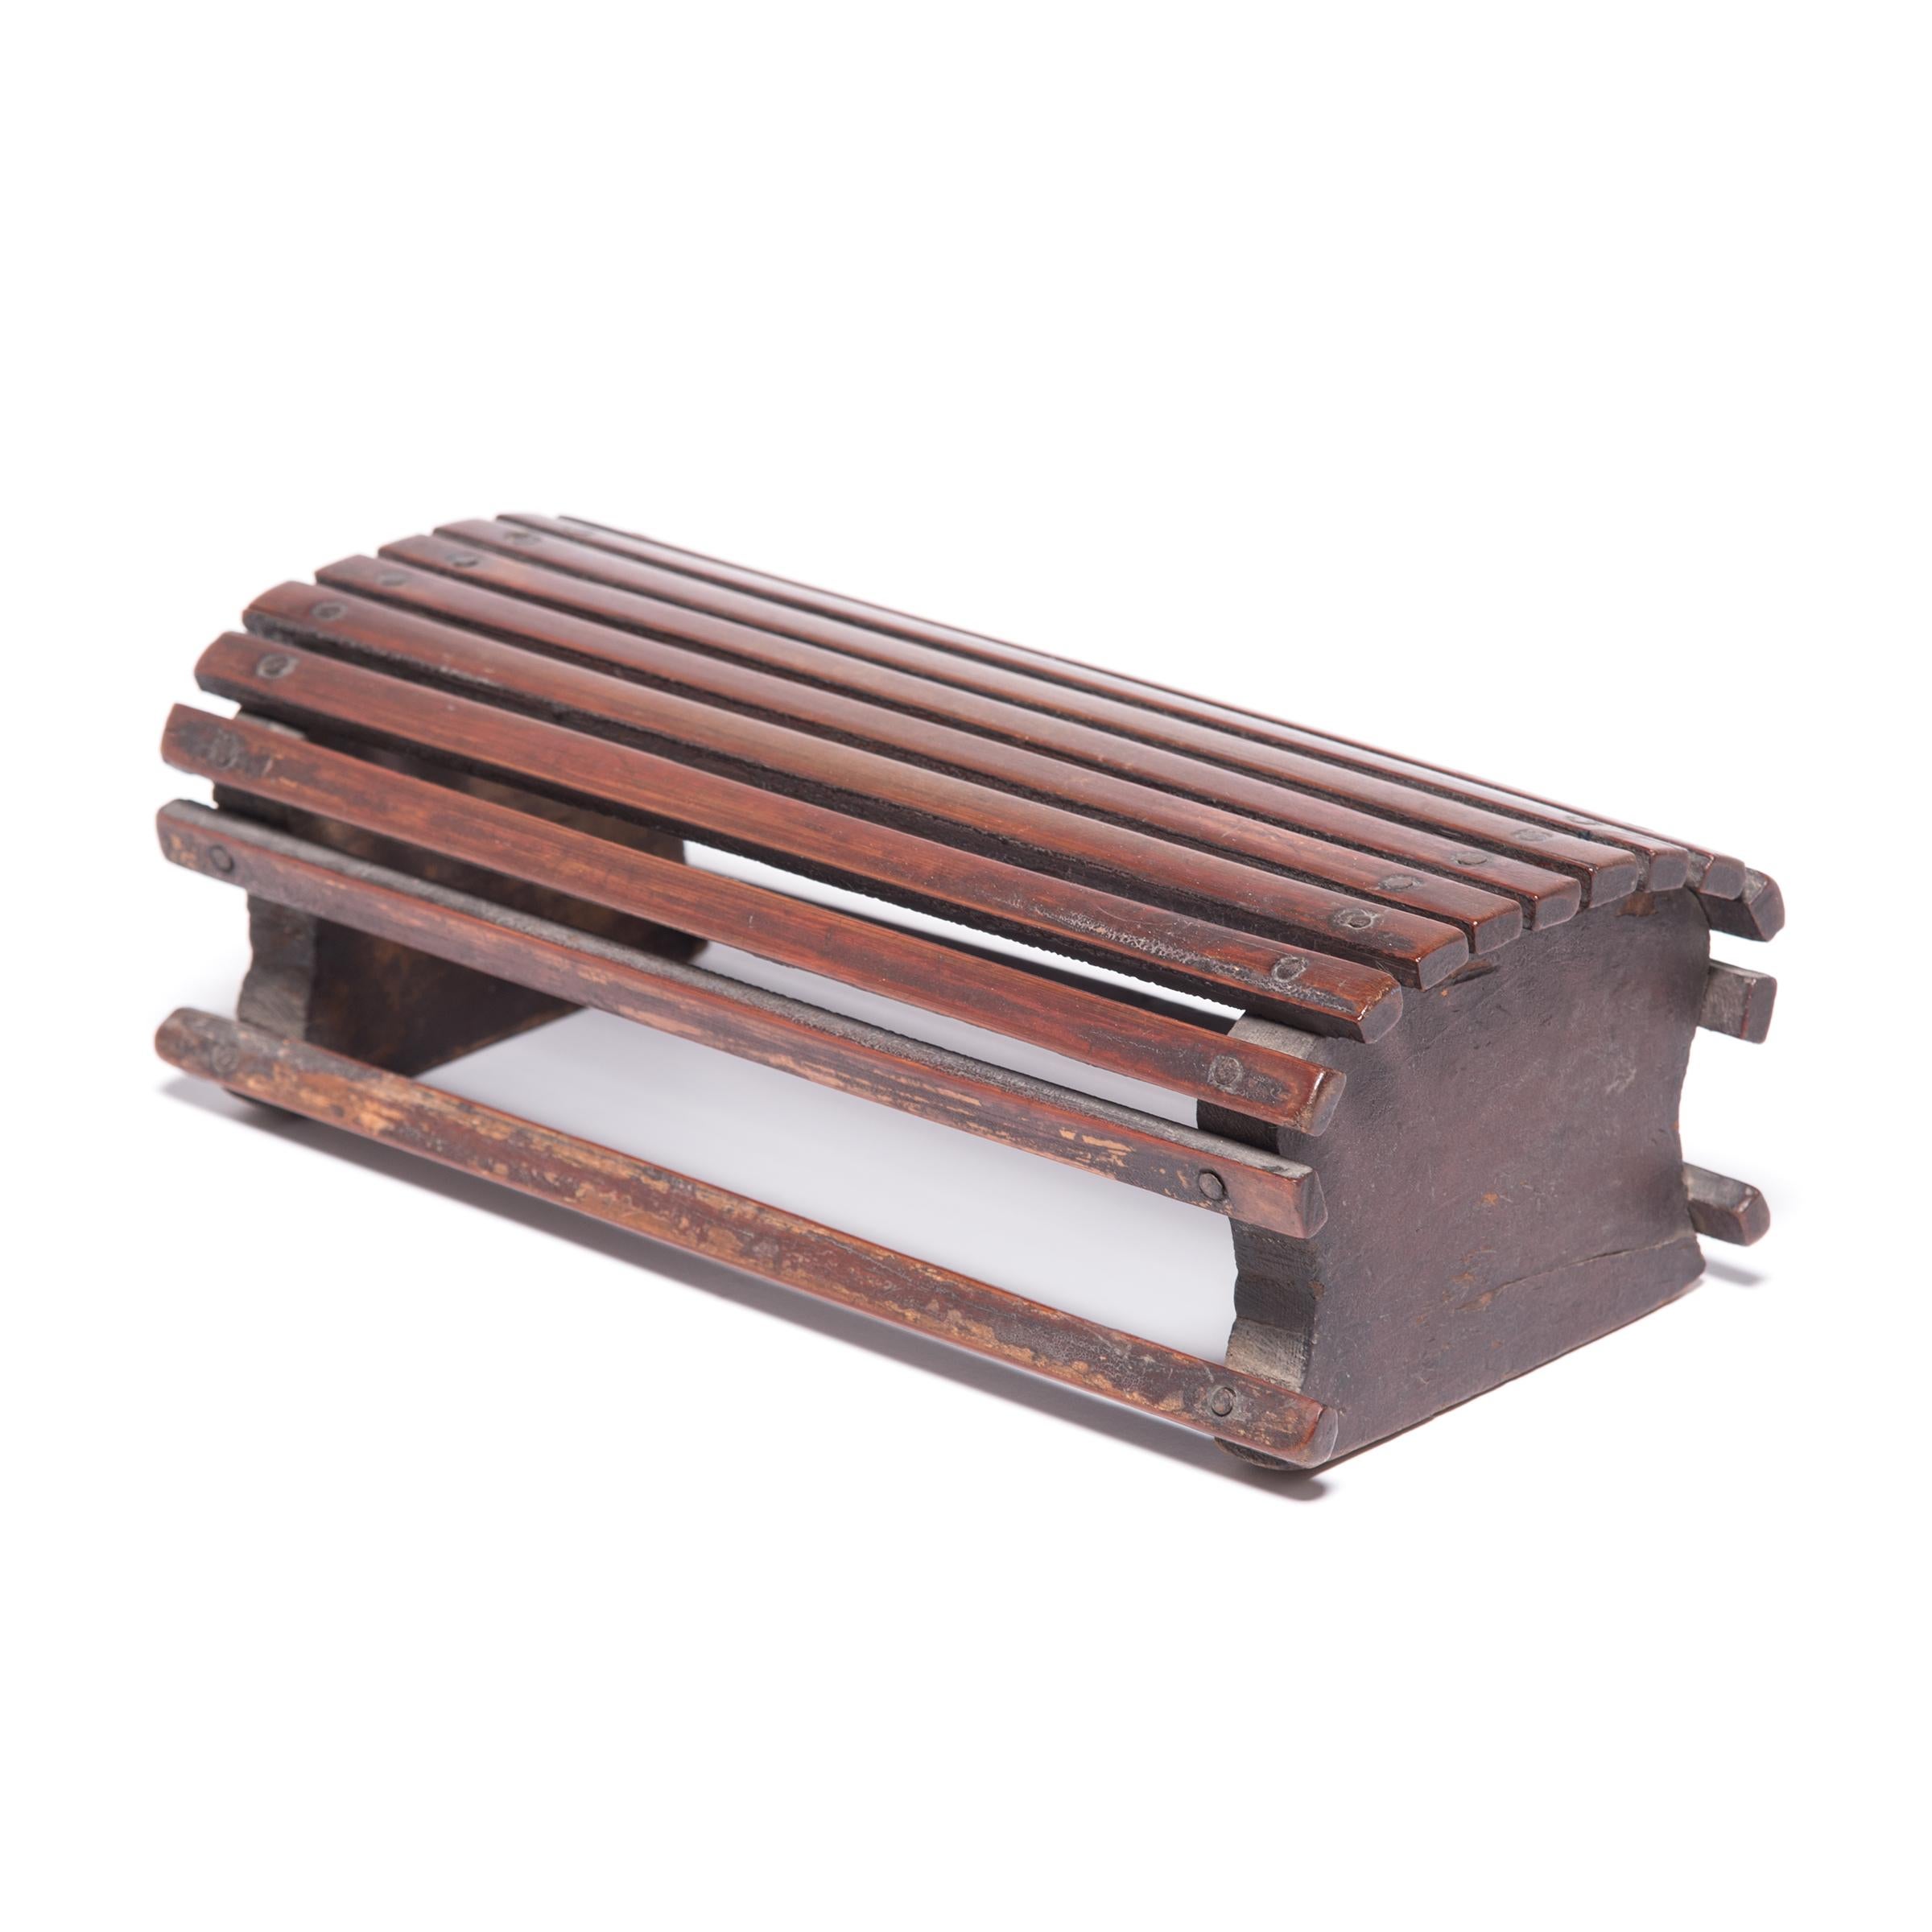 Chinese Slatted Bamboo Headrest, c. 1900 In Good Condition For Sale In Chicago, IL